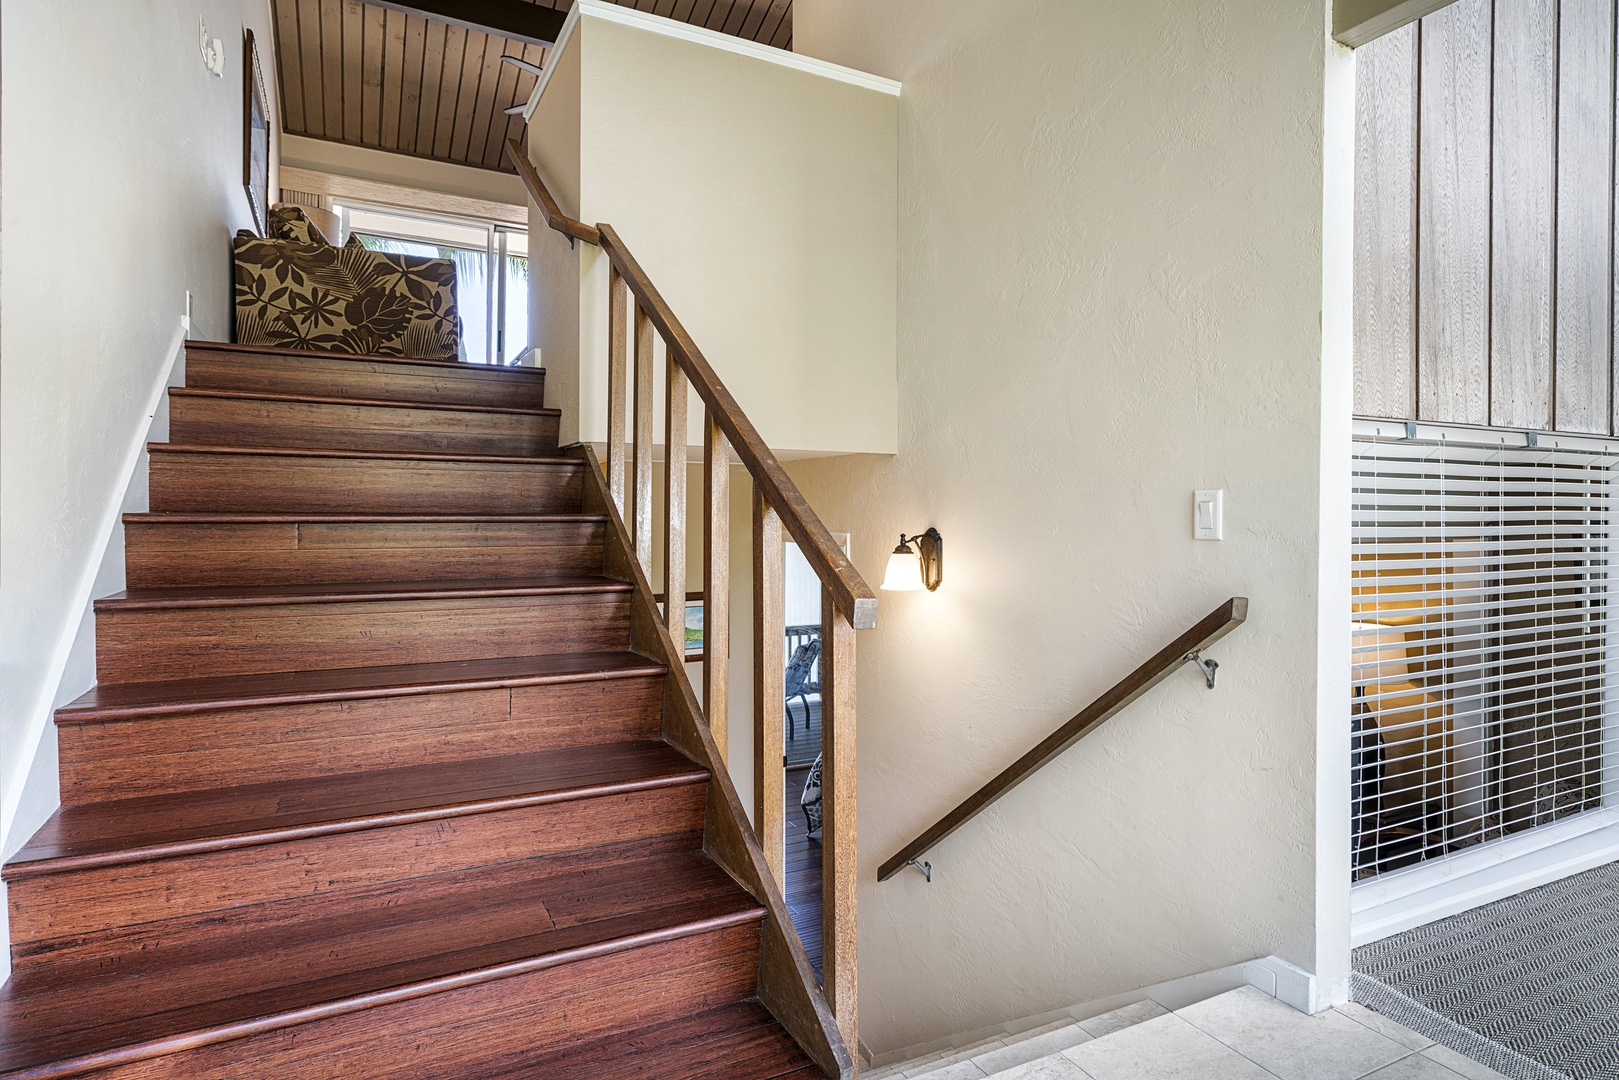 Kailua Kona Vacation Rentals, Keauhou Resort 113 - Stairs leading from the entry to the upstairs living and downstairs bedroom